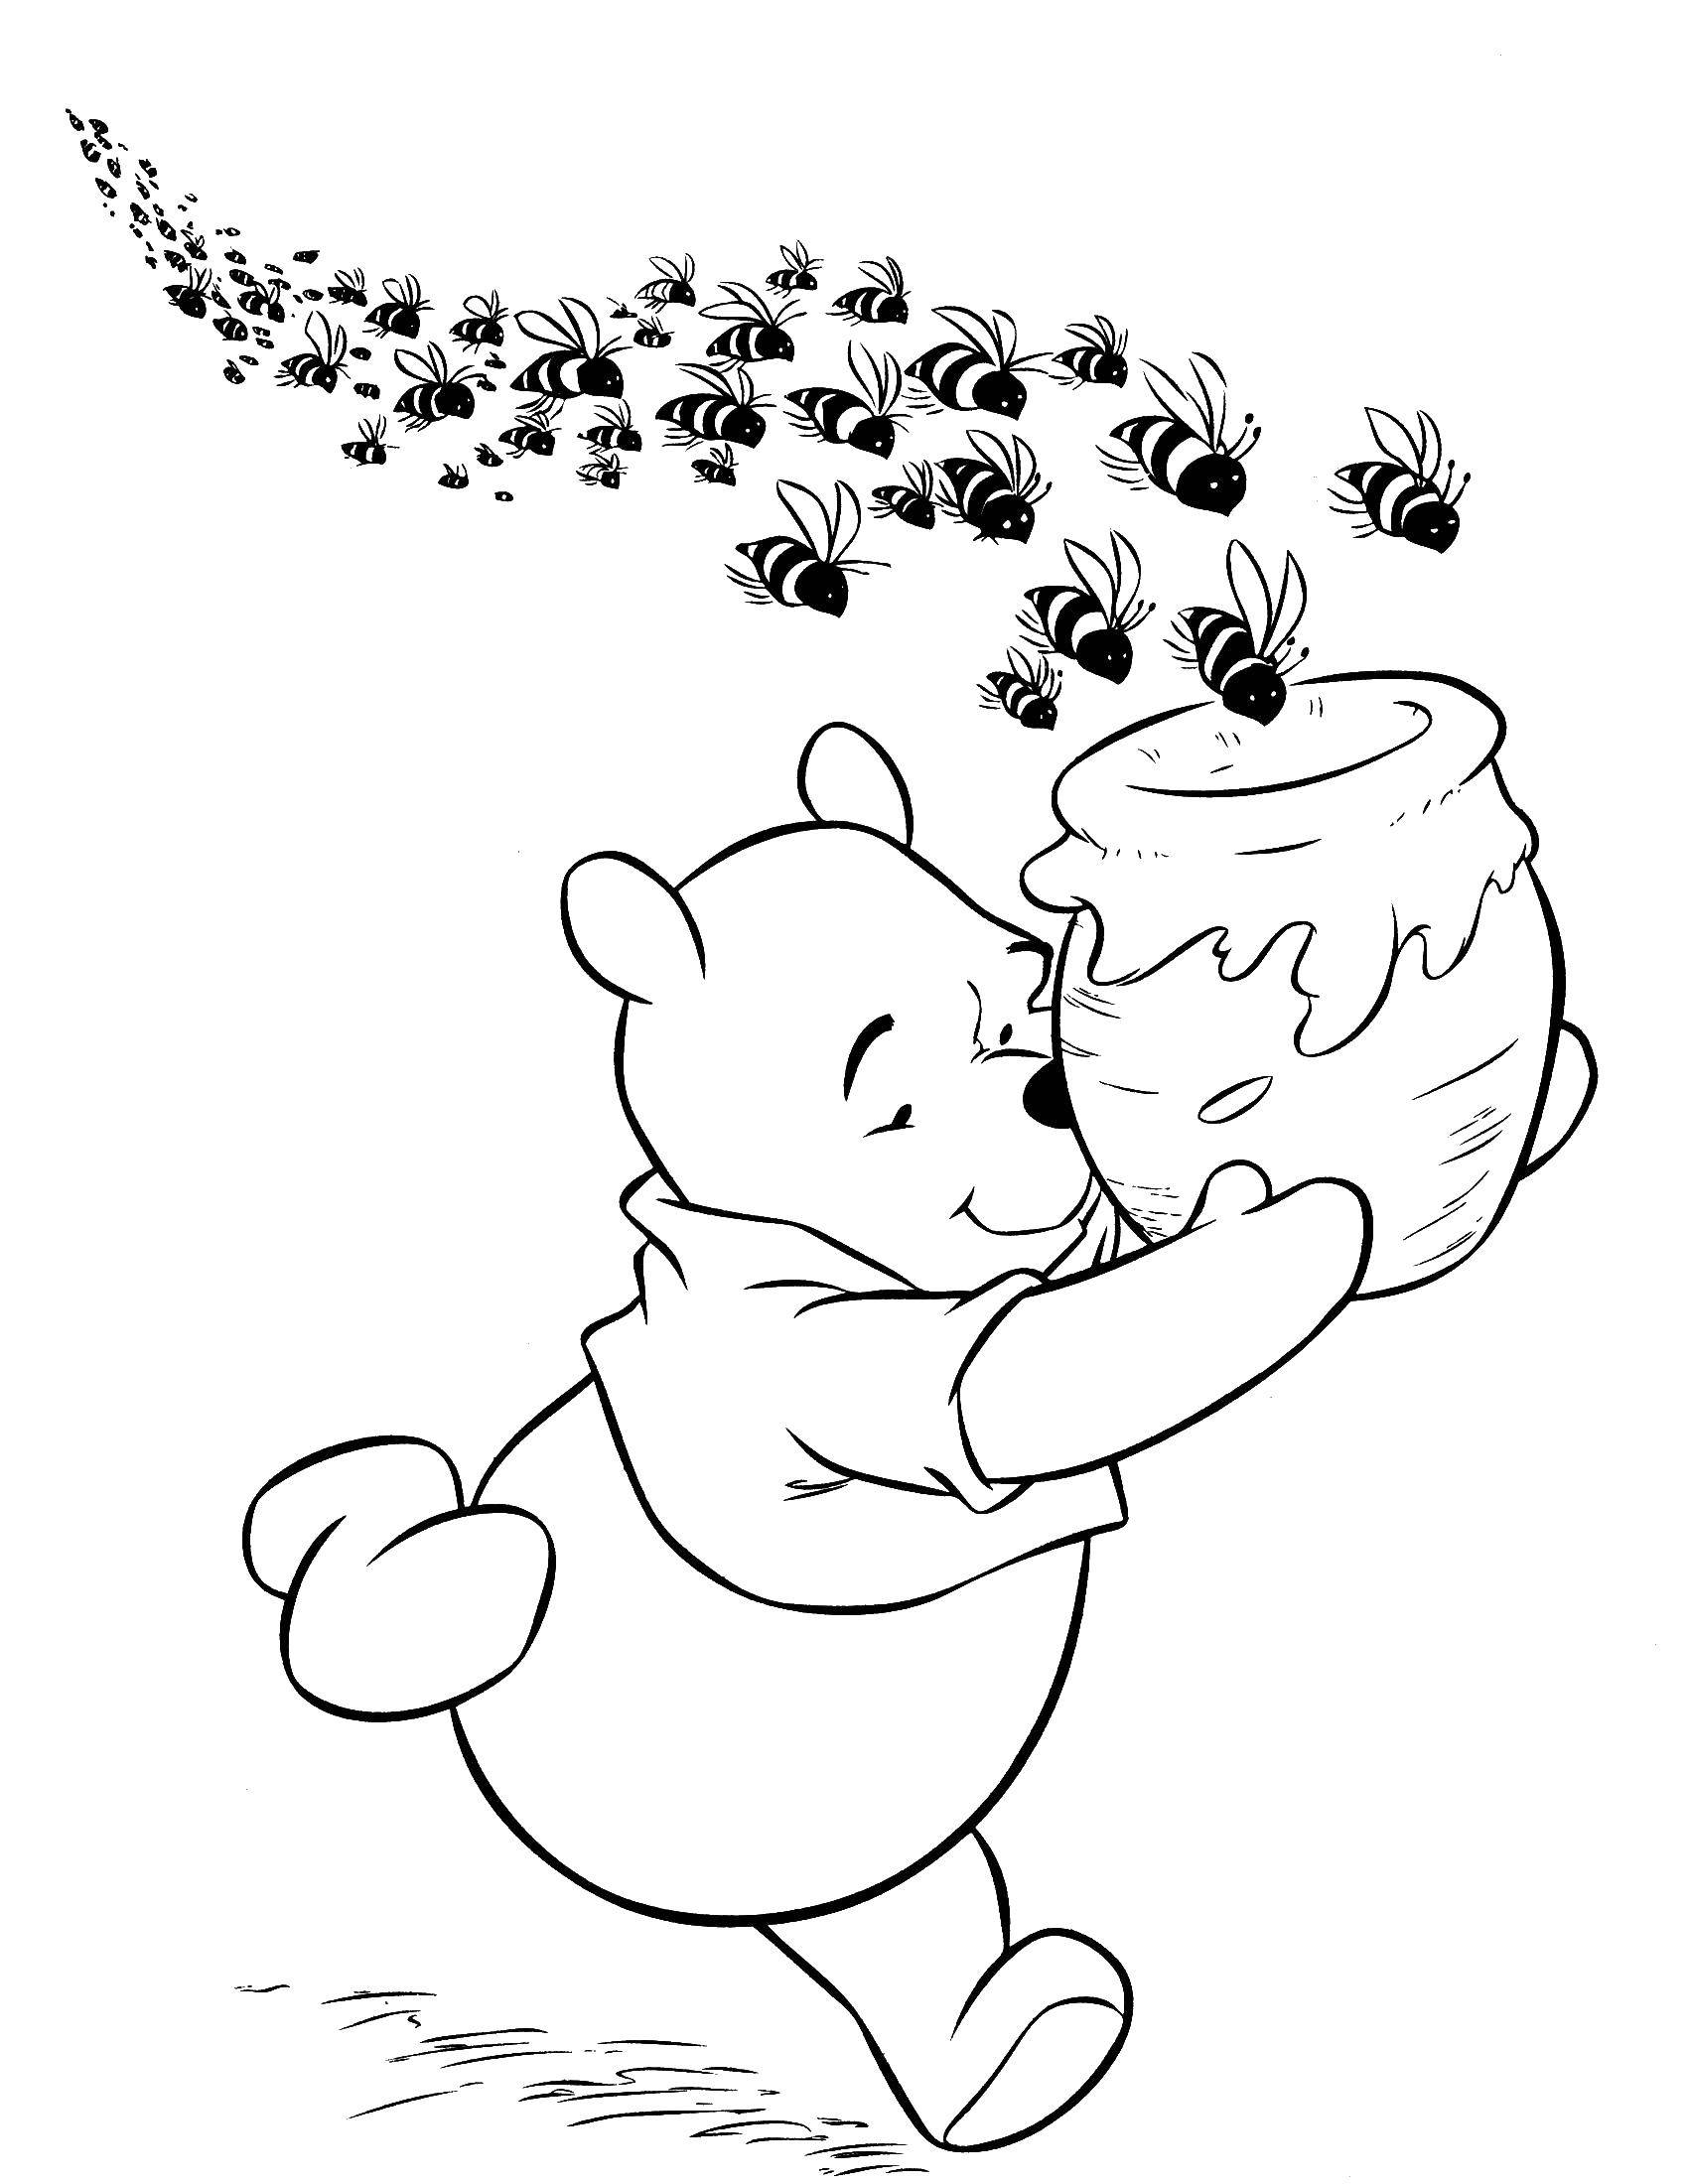 Coloring Winnie the Pooh with honey. Category Honey. Tags:  Disney honey, Winnie the Pooh.